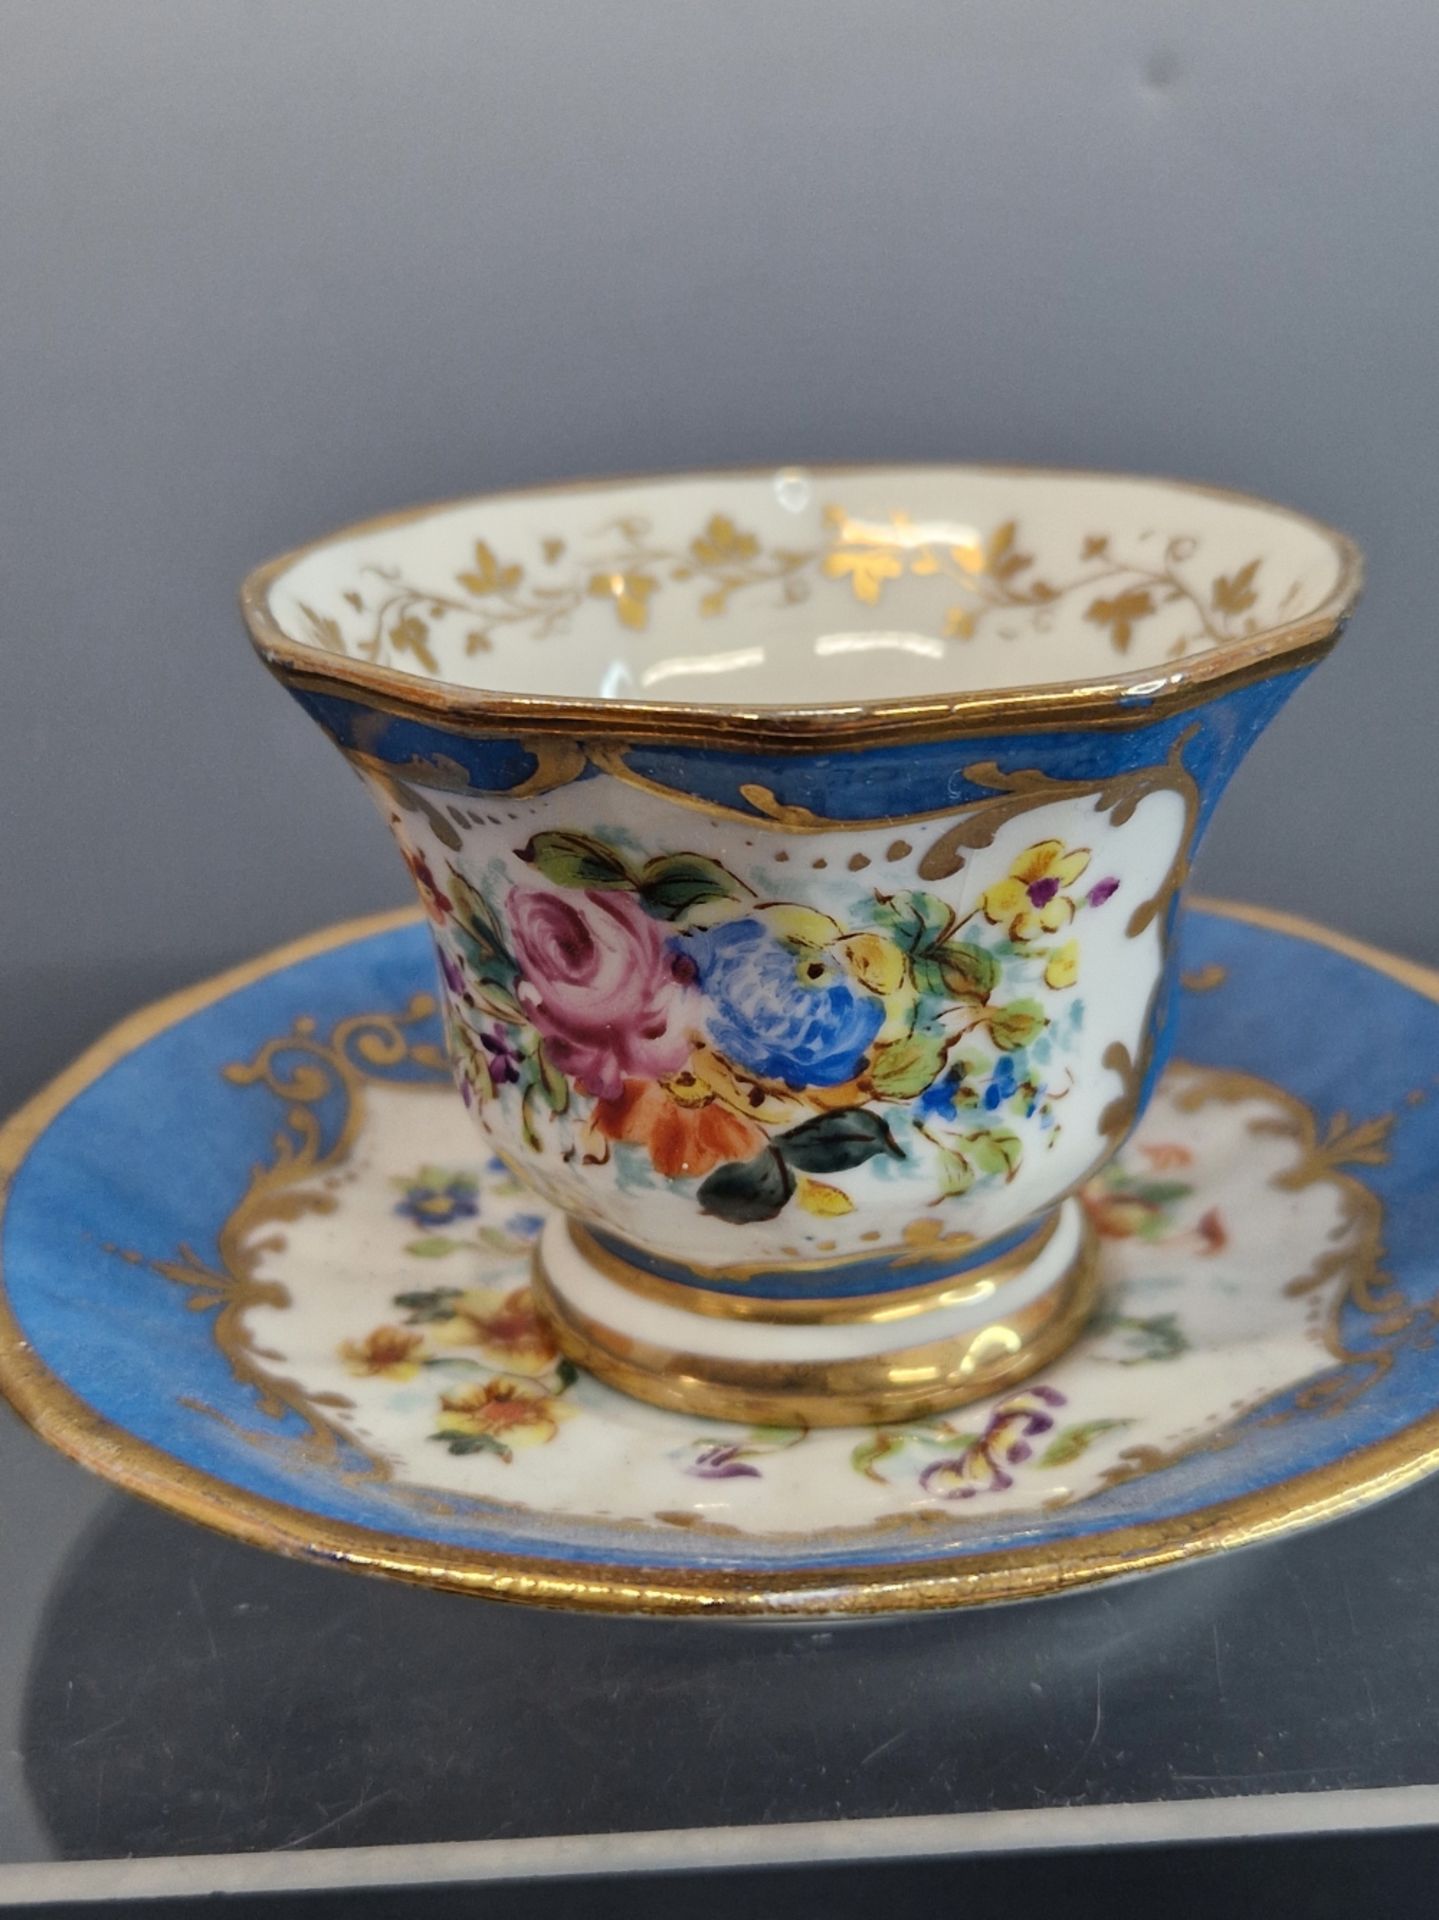 A PARIS PORCELAIN SEVRES STYLE BLUE GROUND FLOWER PAINTED TEA POT, COVER, CUP AND SAUCER - Image 9 of 12